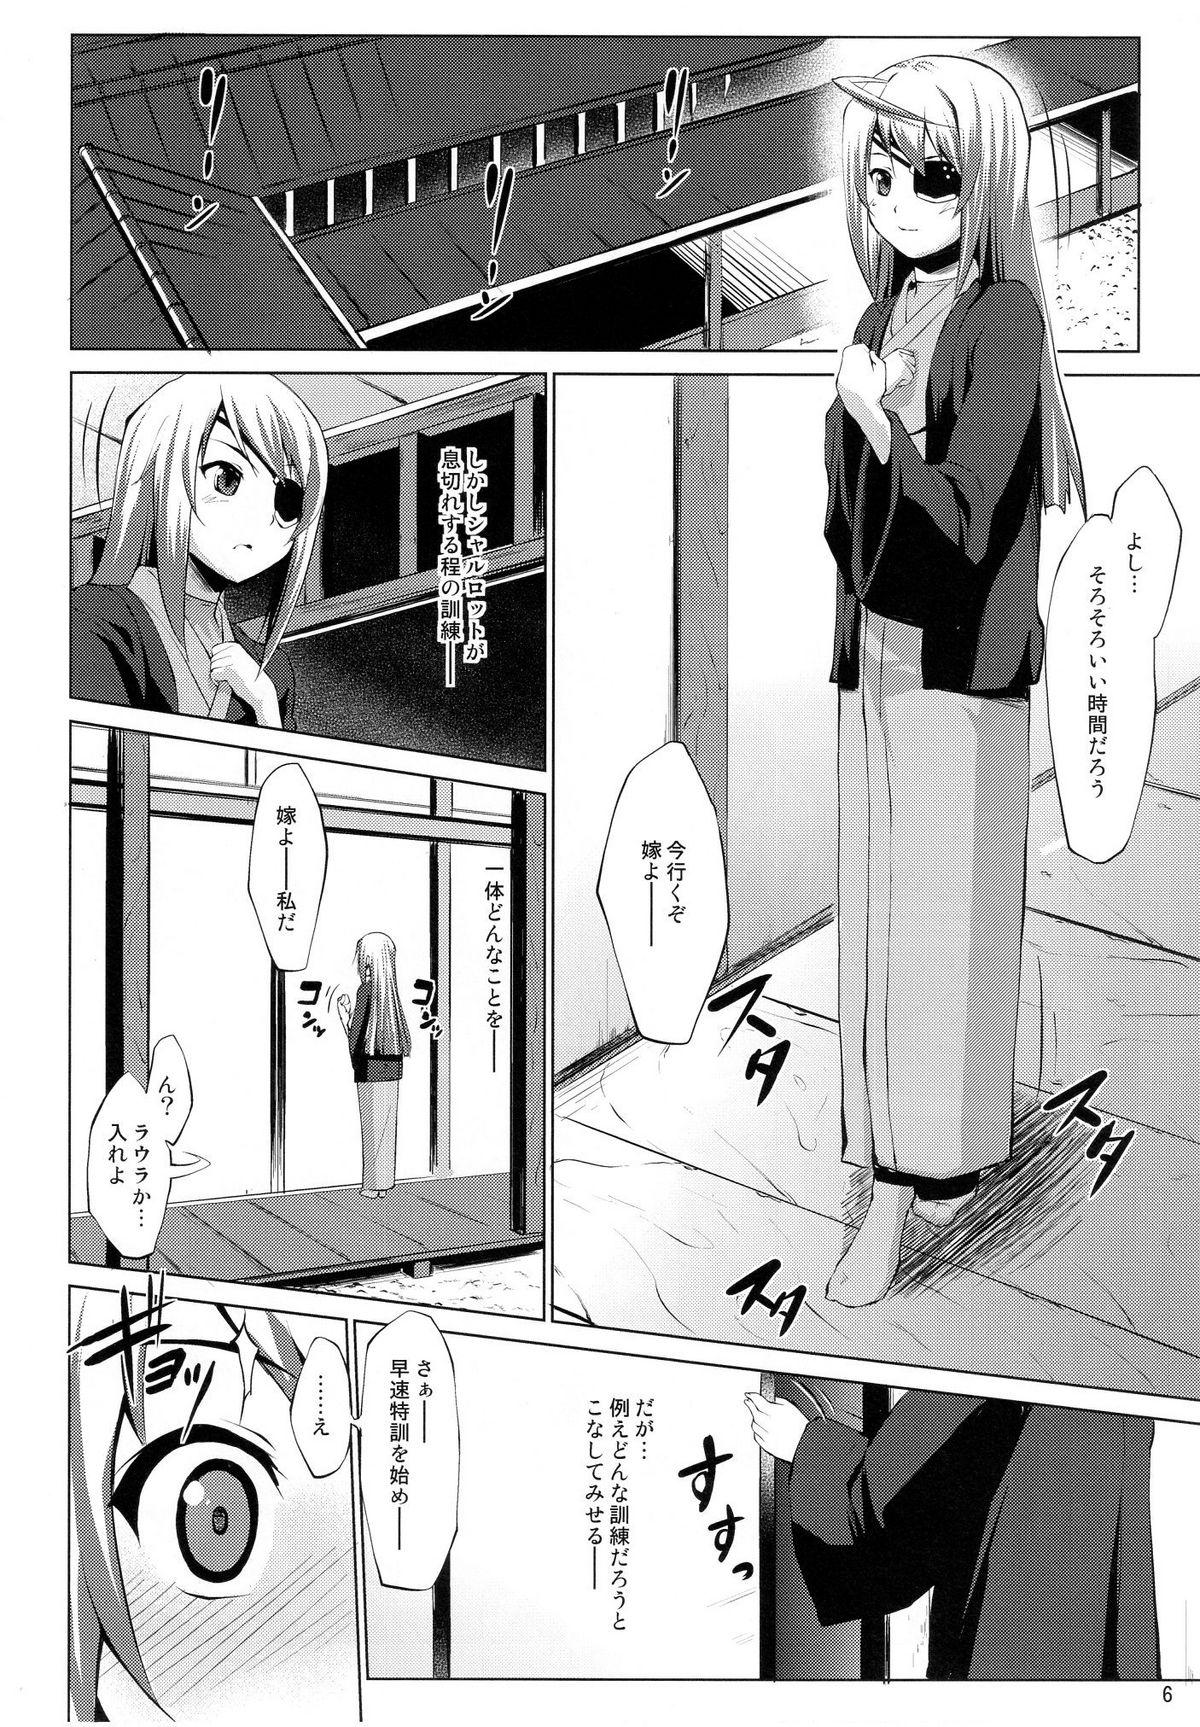 Wife Immoral Stratos 2 - Infinite stratos Analsex - Page 6